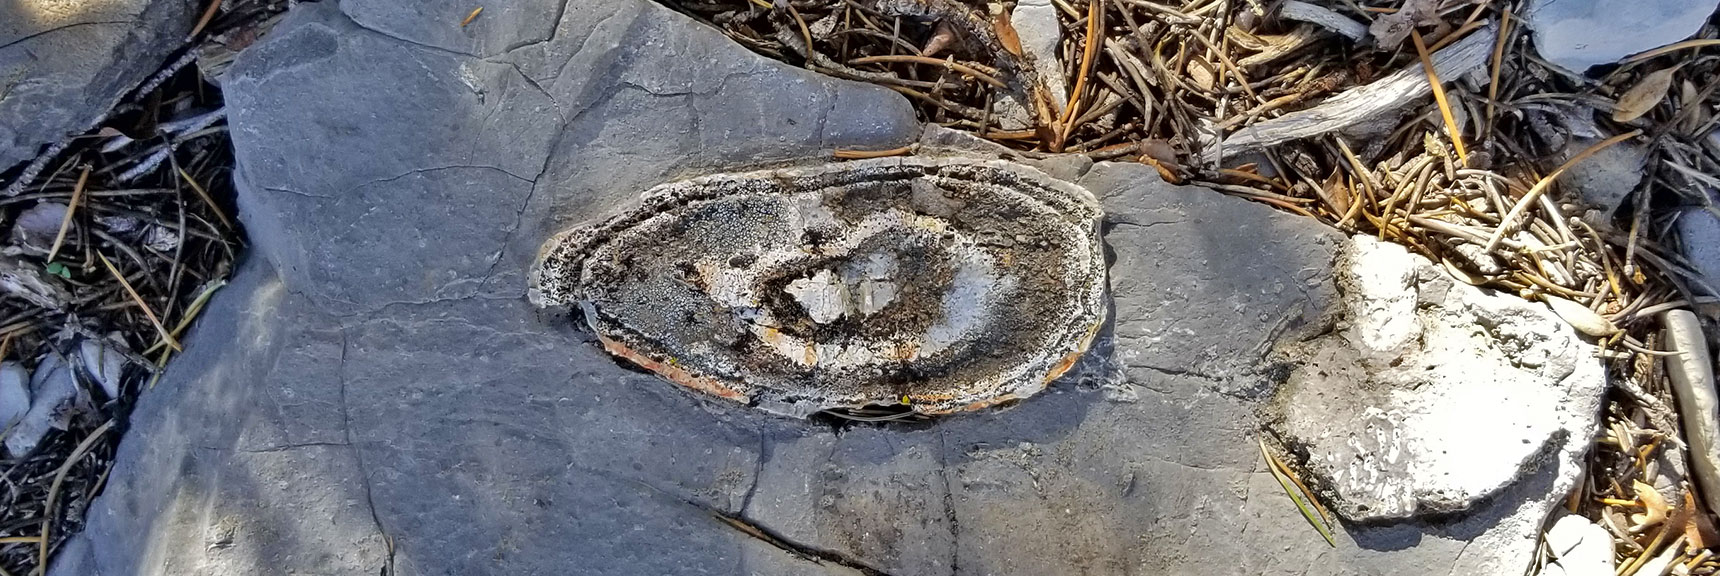 Fossil on the Approach Ridge to Summit West of El Padre Mountain, La Madre Mountains Wilderness, Nevada